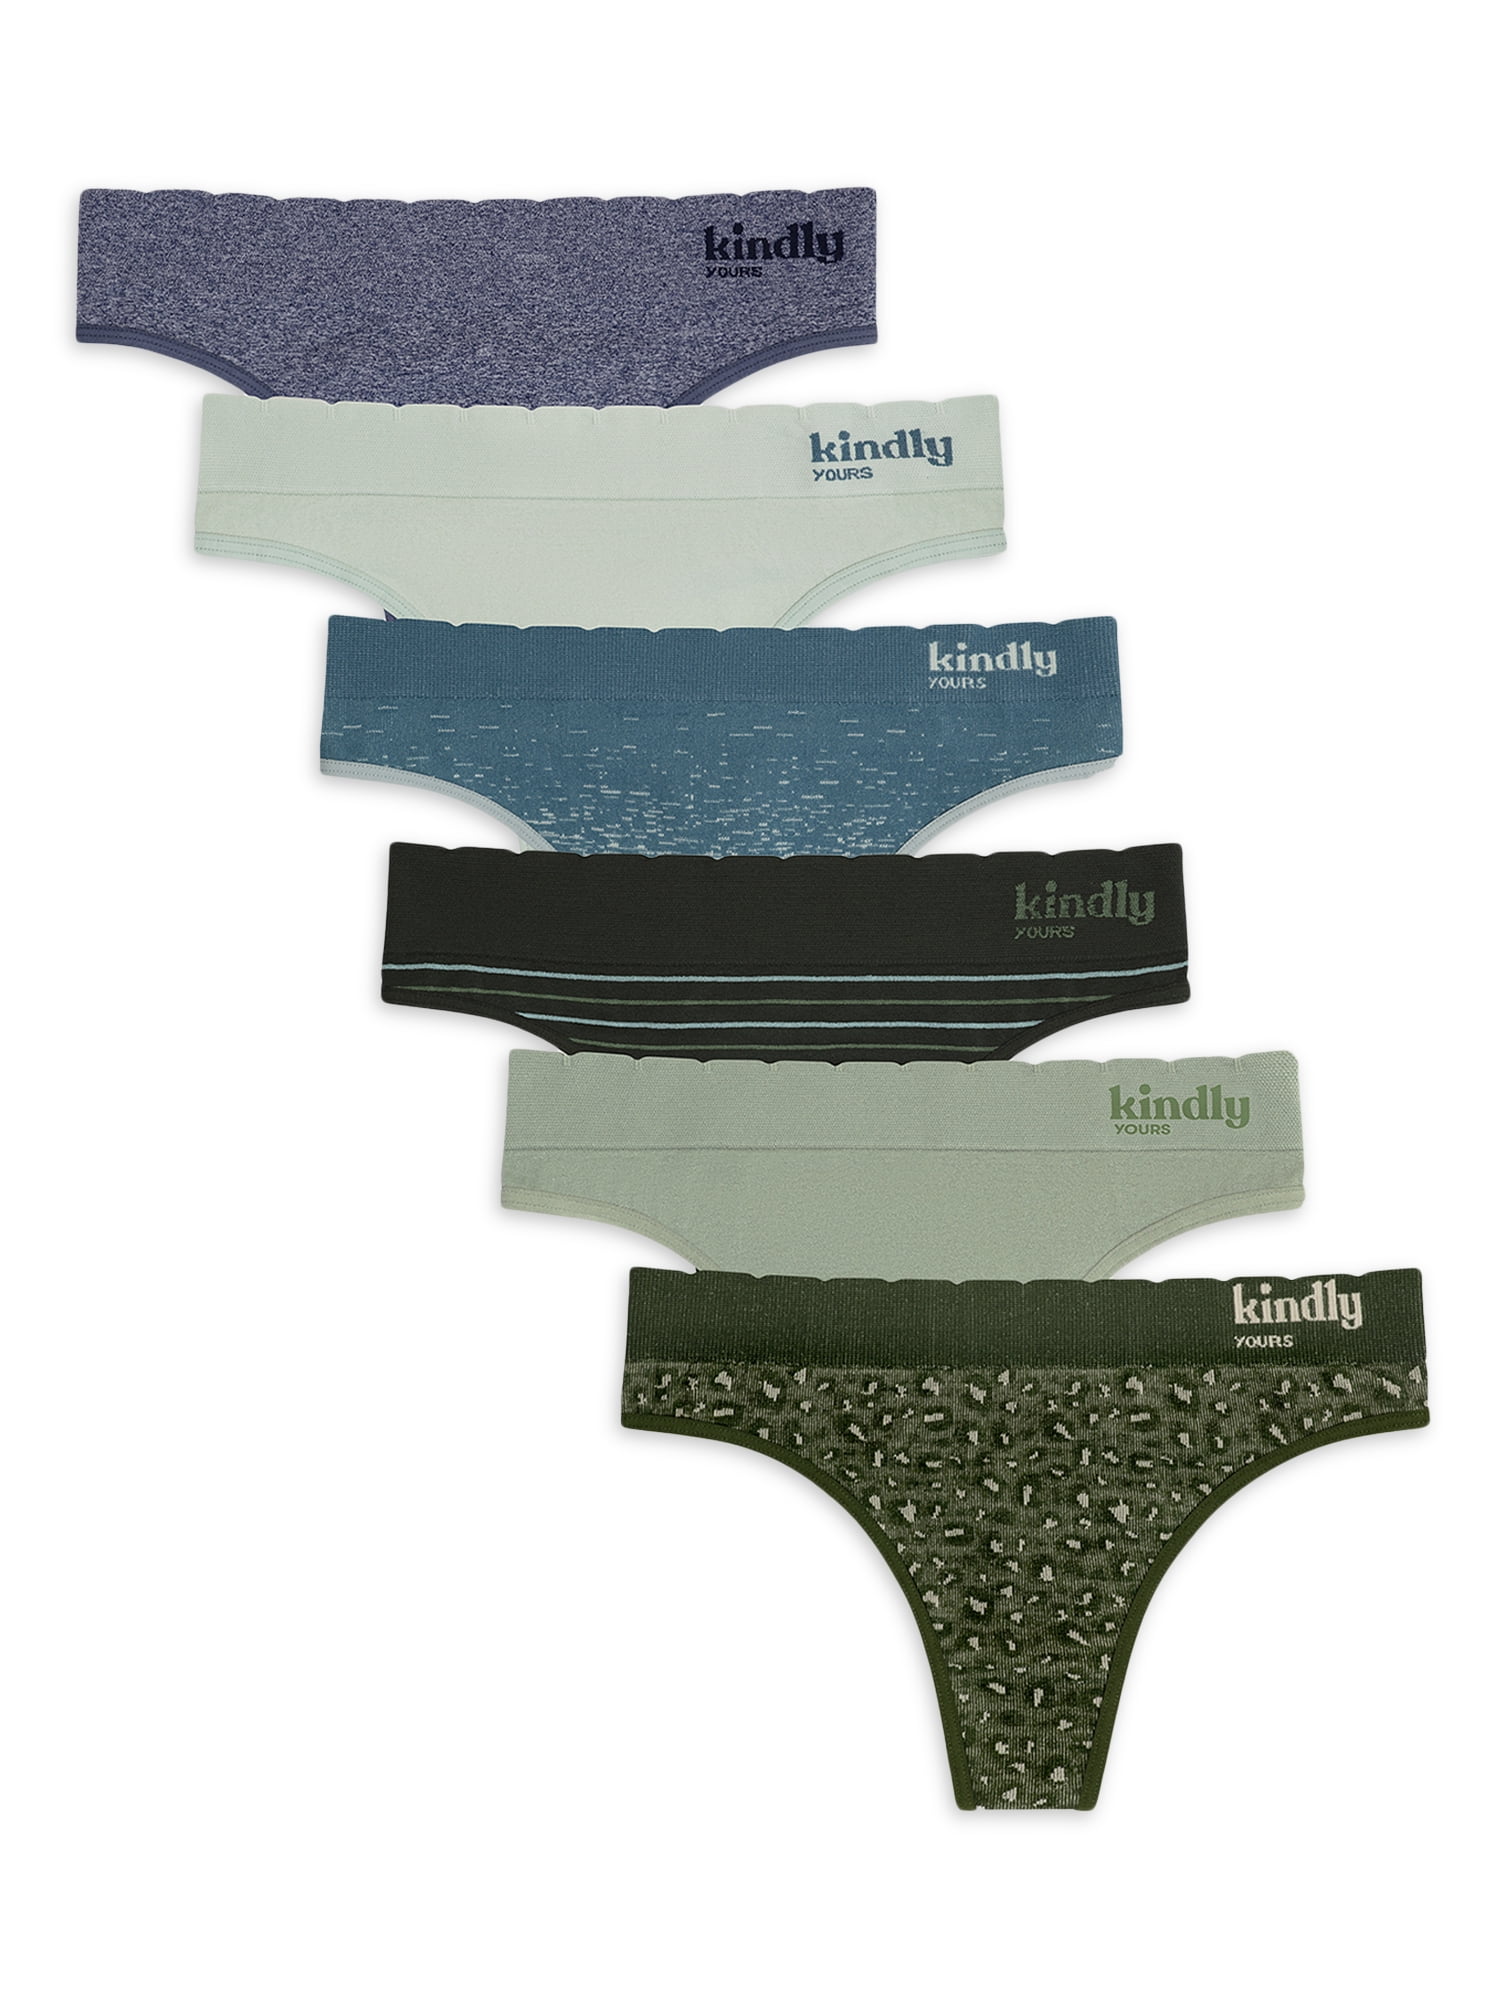 Kindly Yours Women's Sustainable Micro Hipster Panties, 3-Pack